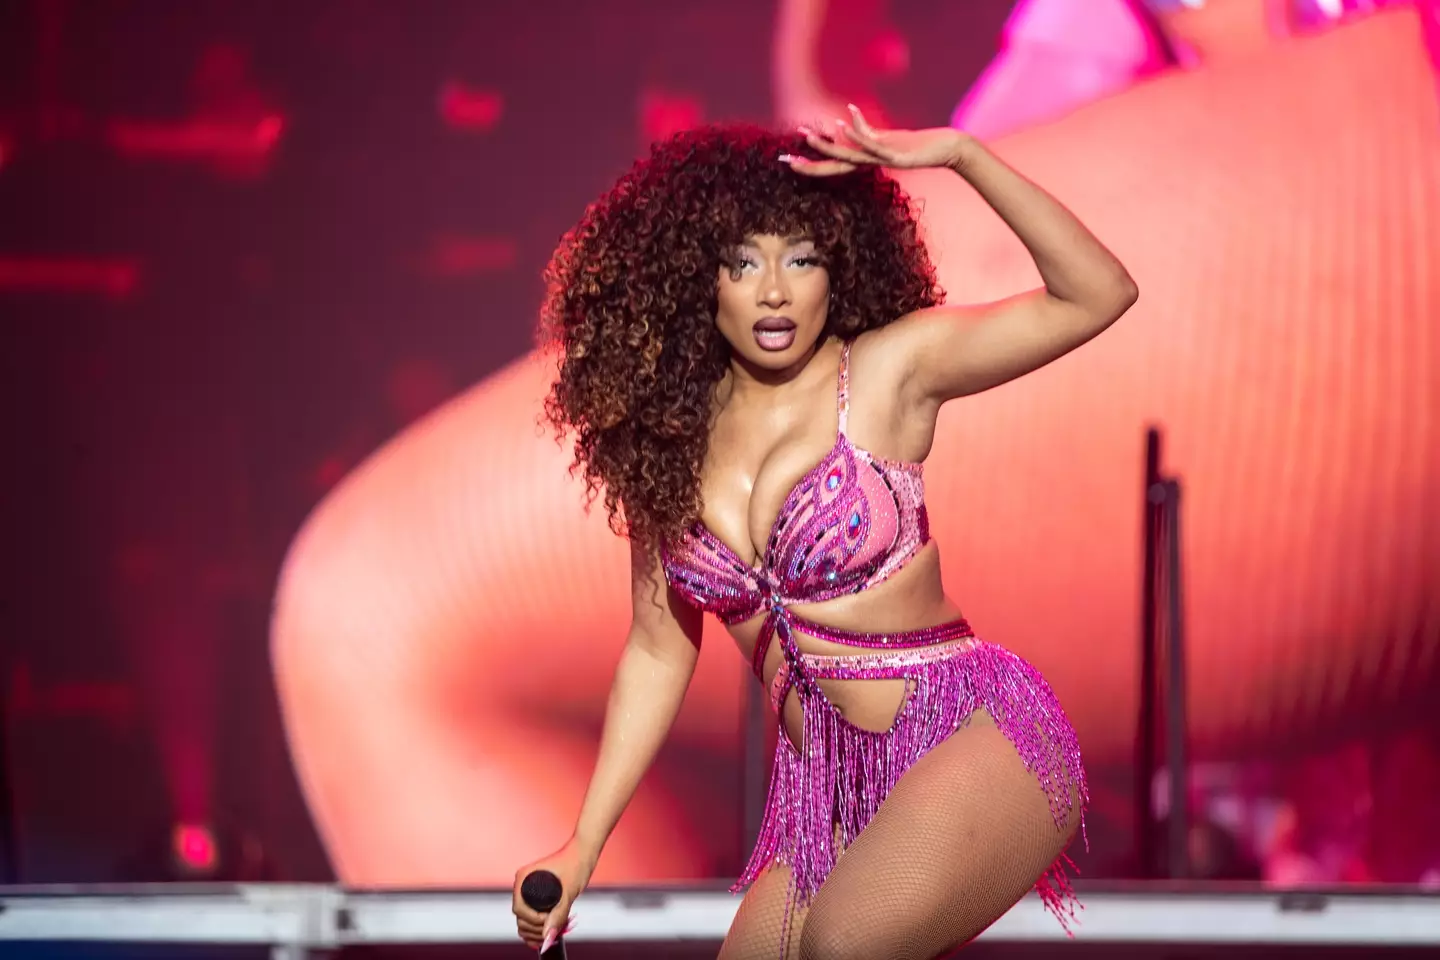 During a verse the rapper said: “If I was to ask for Megan Thee Stallion if she would collab with me, would I really have a shot at a feat?” (Photo by Miikka Skaffari/FilmMagic)